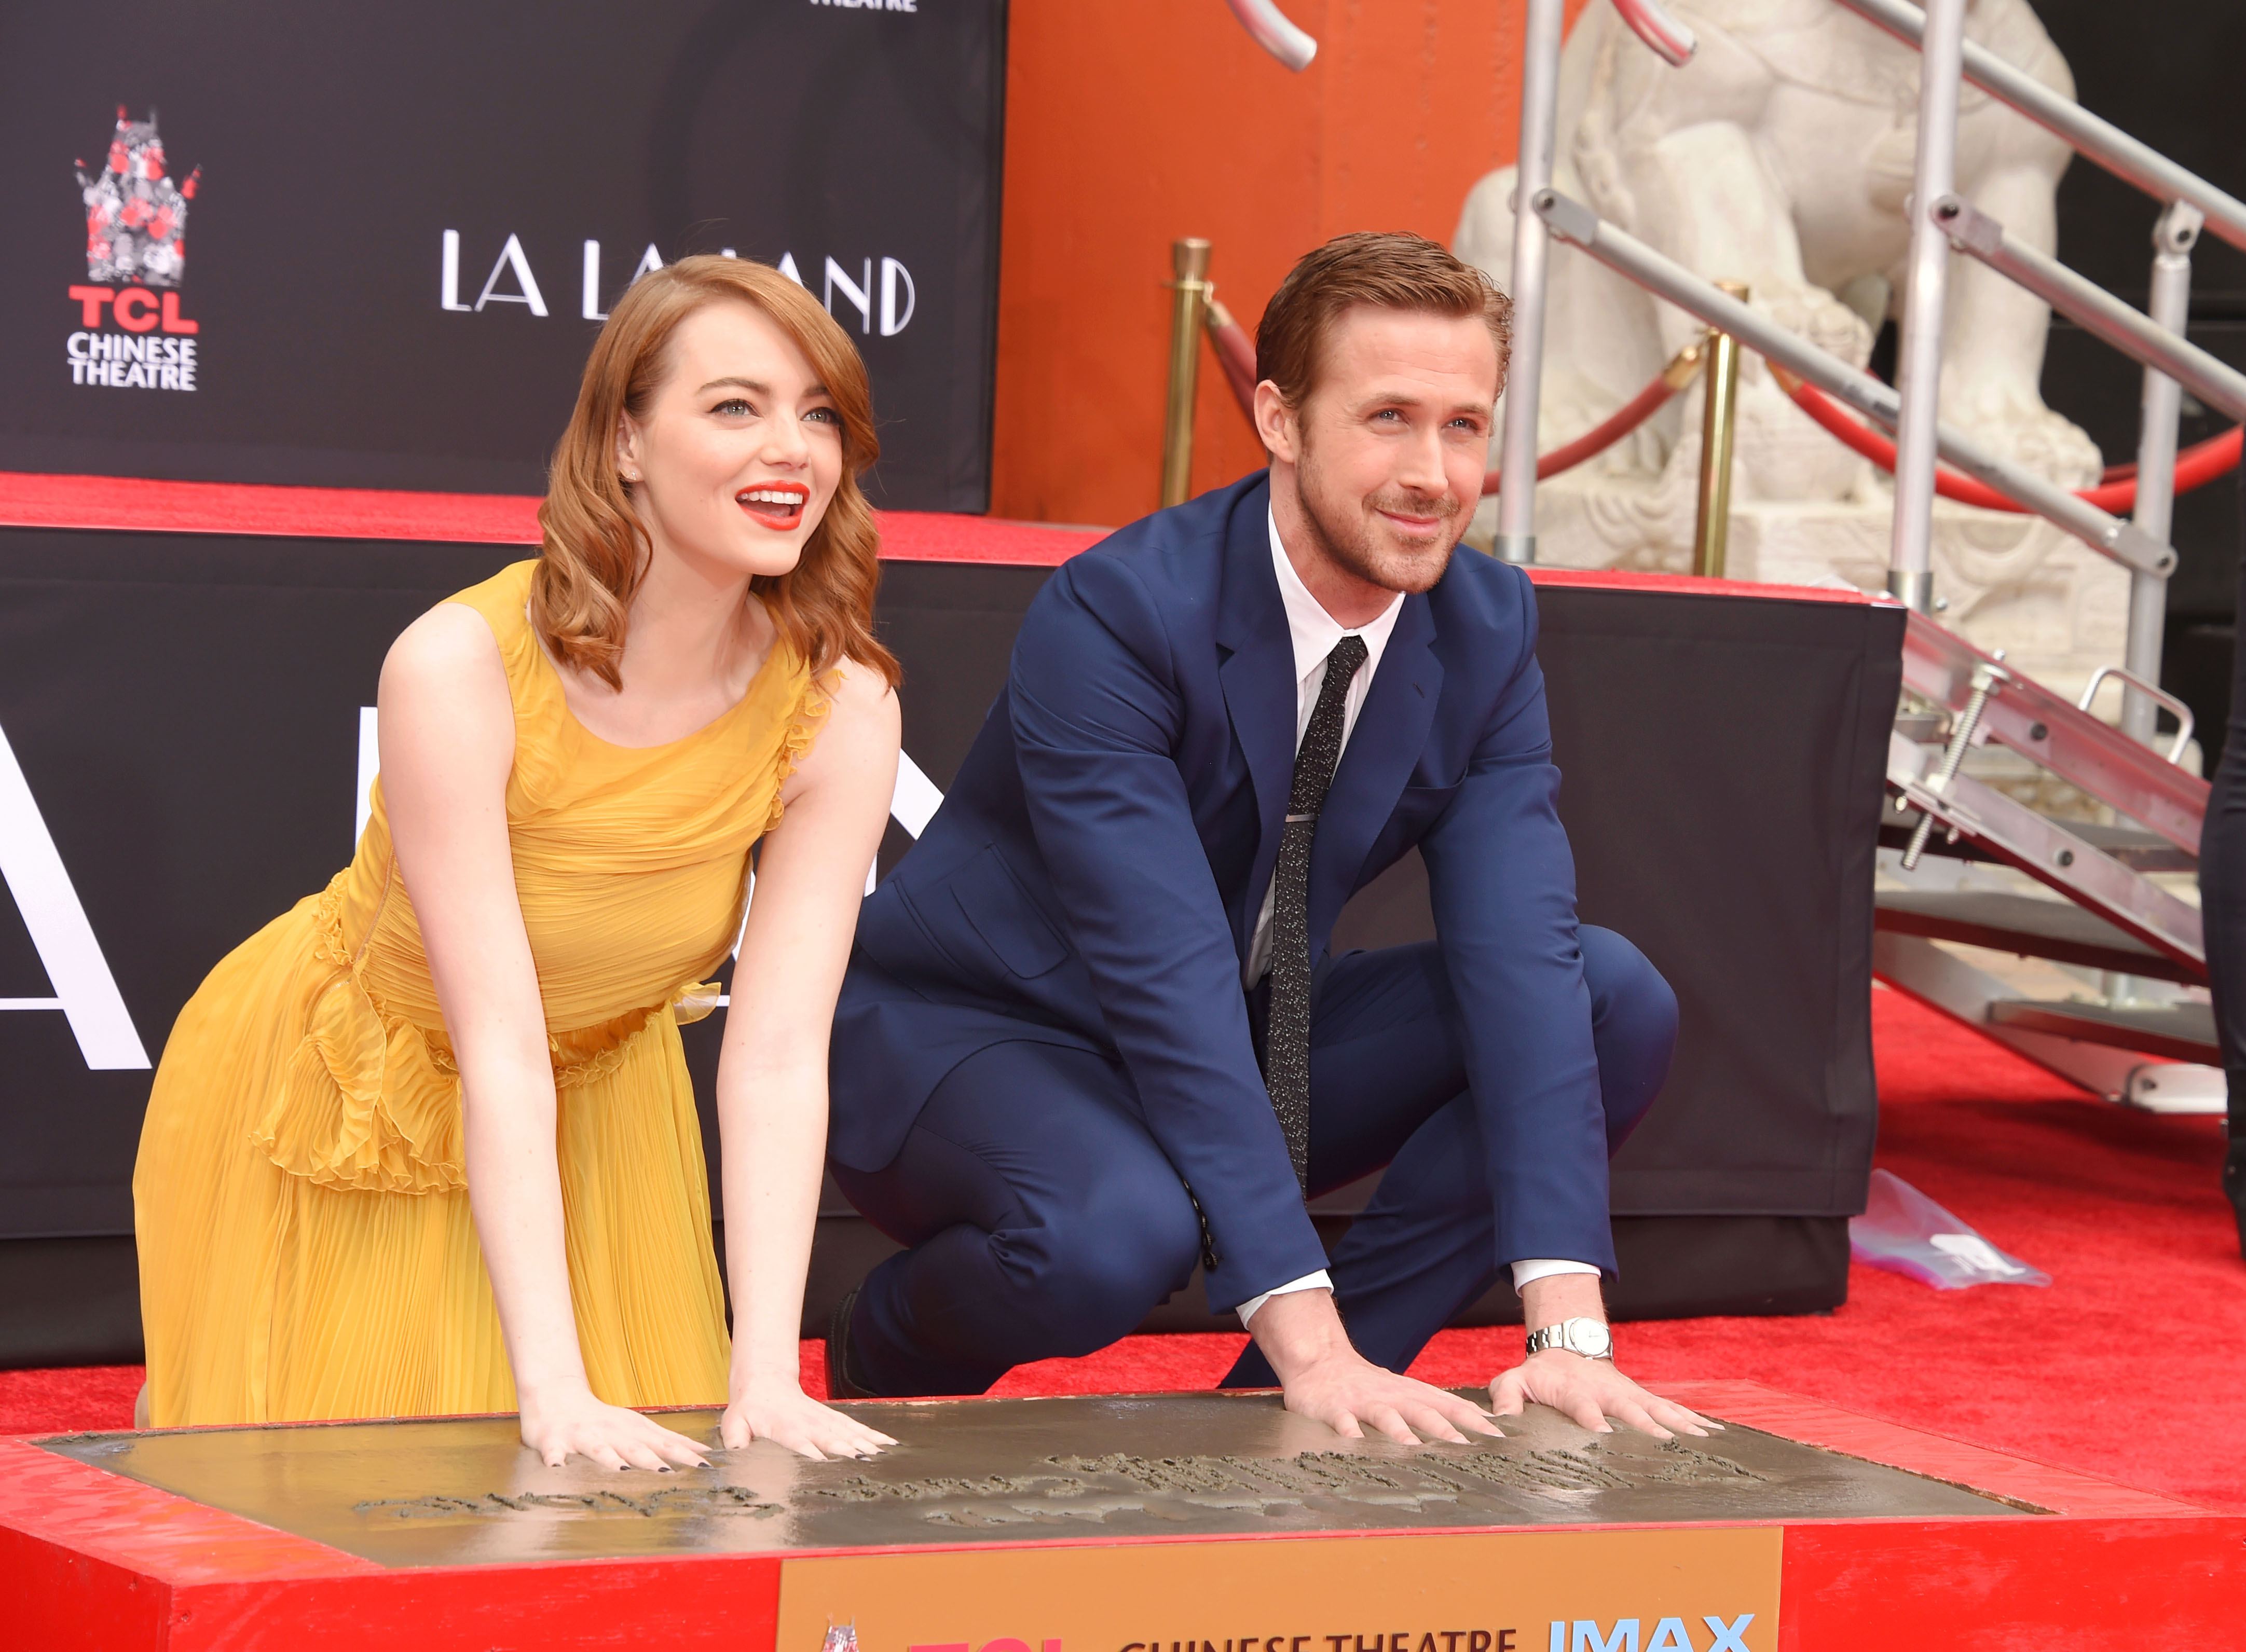 HOLLYWOOD, CA - DECEMBER 07: Actress Emma Stone (L) and actor Ryan Gosling attend the Hand And Footprint Ceremony for Ryan Gosling and Emma Stone at the TCL Chinese Theatre IMAX on December 7, 2016 in Hollywood, California. (Photo by Jeffrey Mayer/WireImage) (Jeffrey Mayer—WireImage)